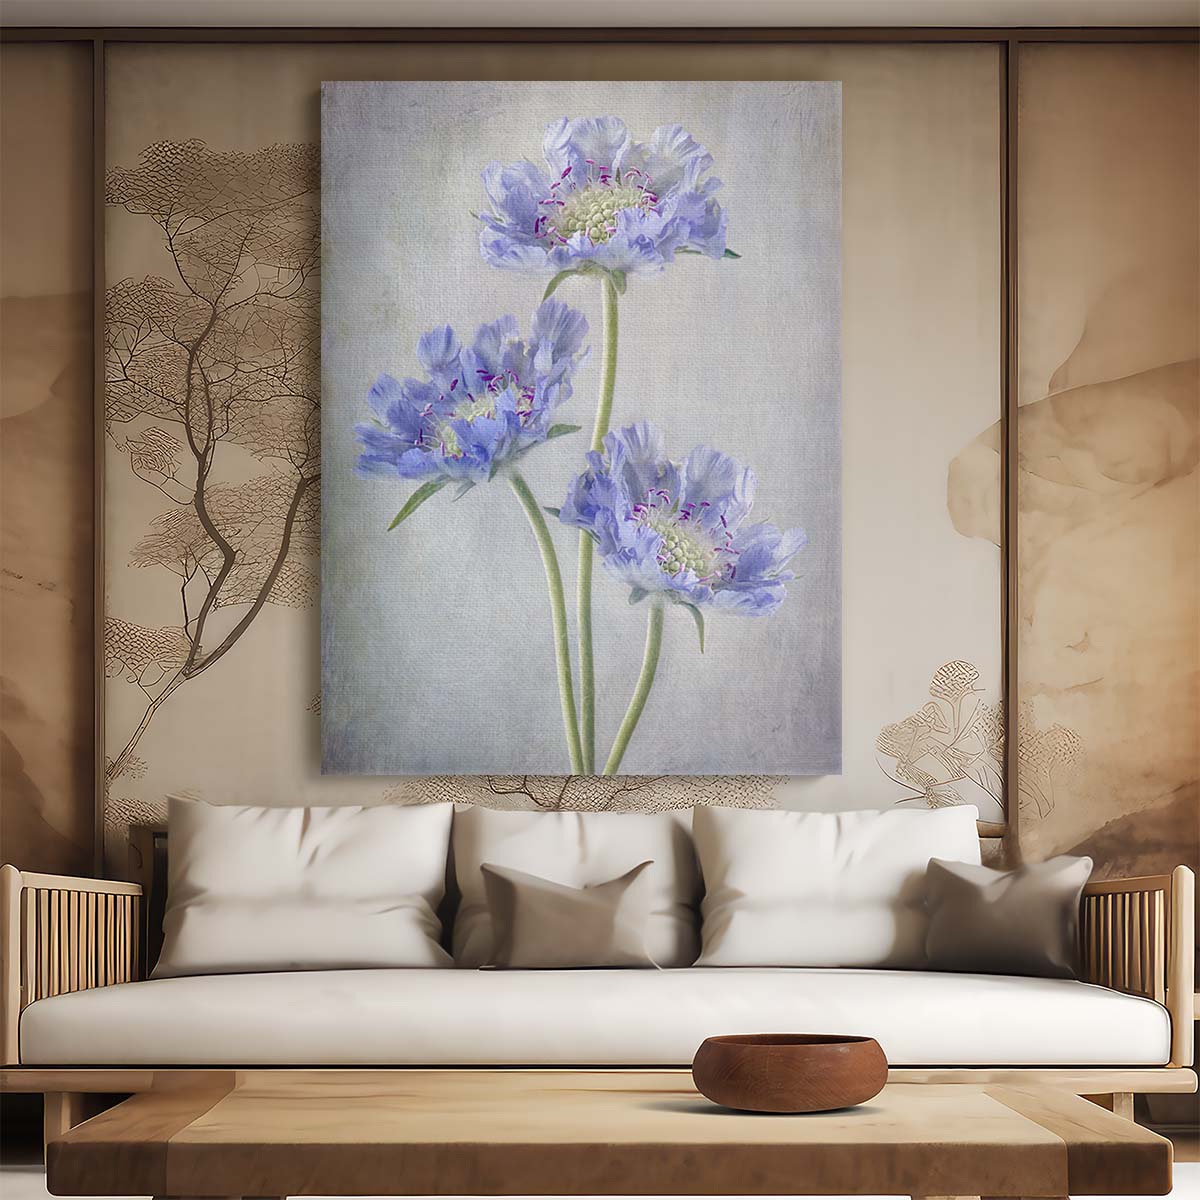 Scabiosa Pincushion Purple Flower Photography Still Life Floral Art by Mandy Disher by Luxuriance Designs, made in USA